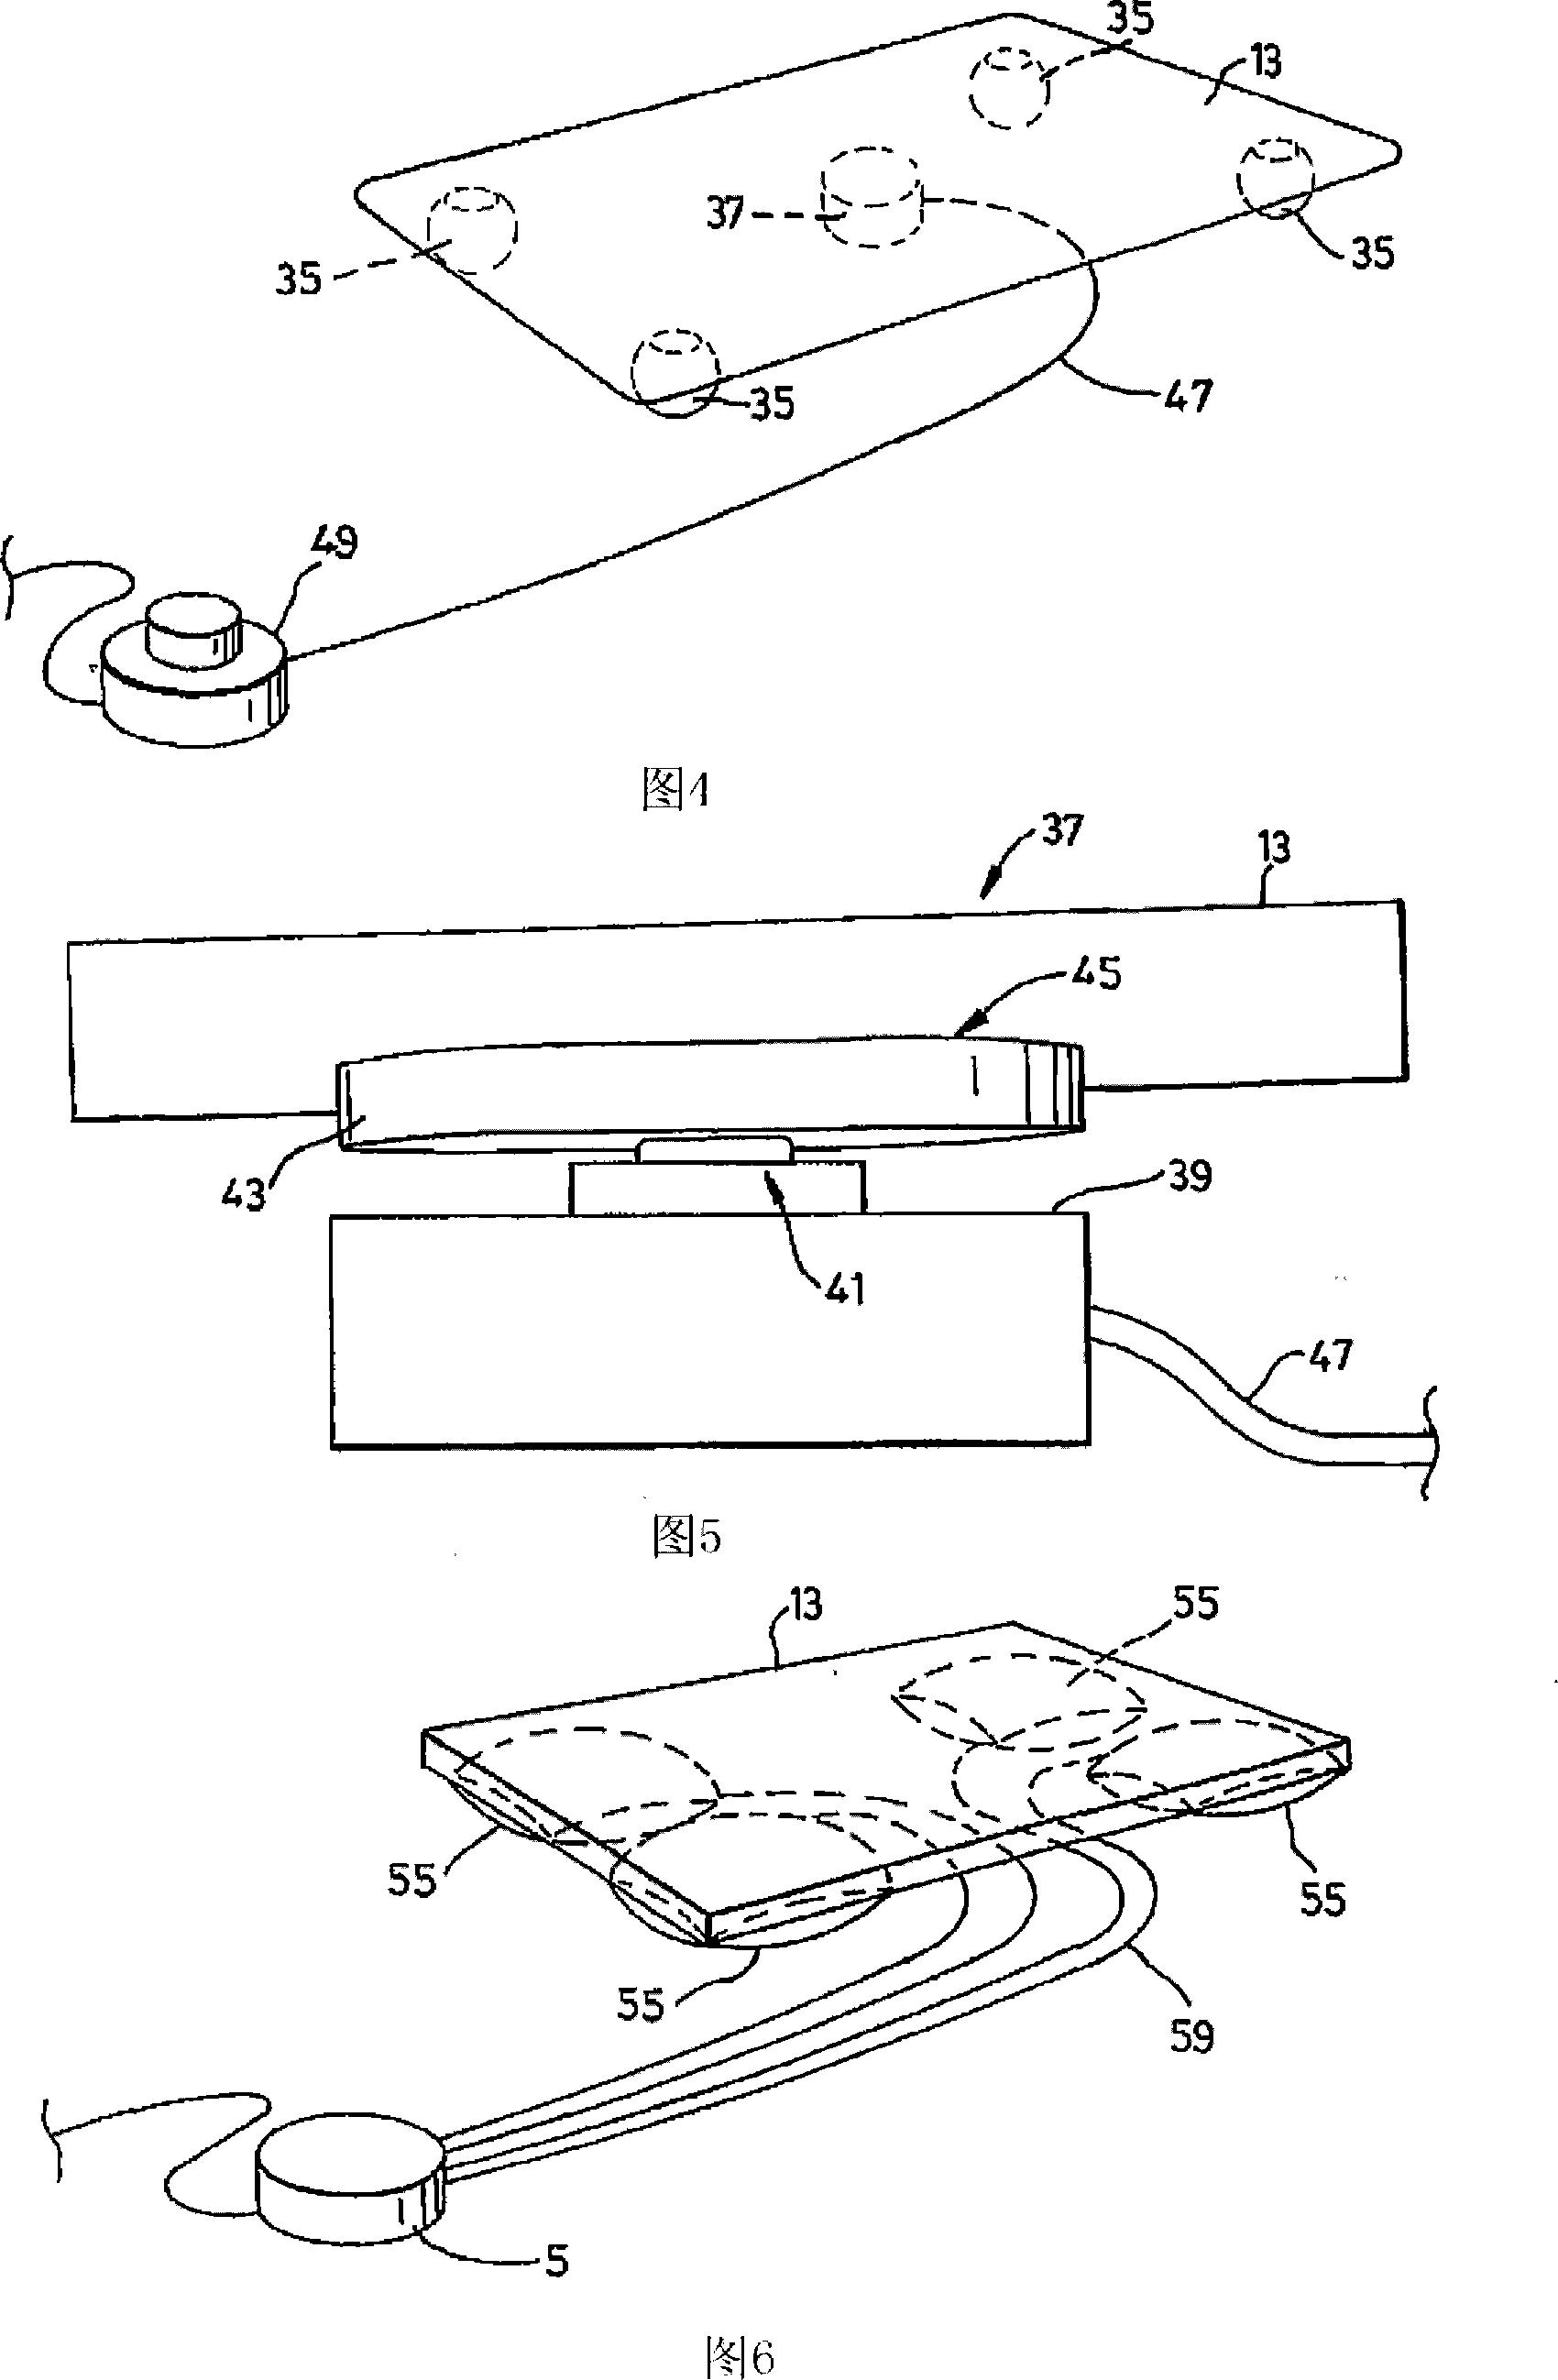 A device for supporting, rolling and/or rocking a mattress